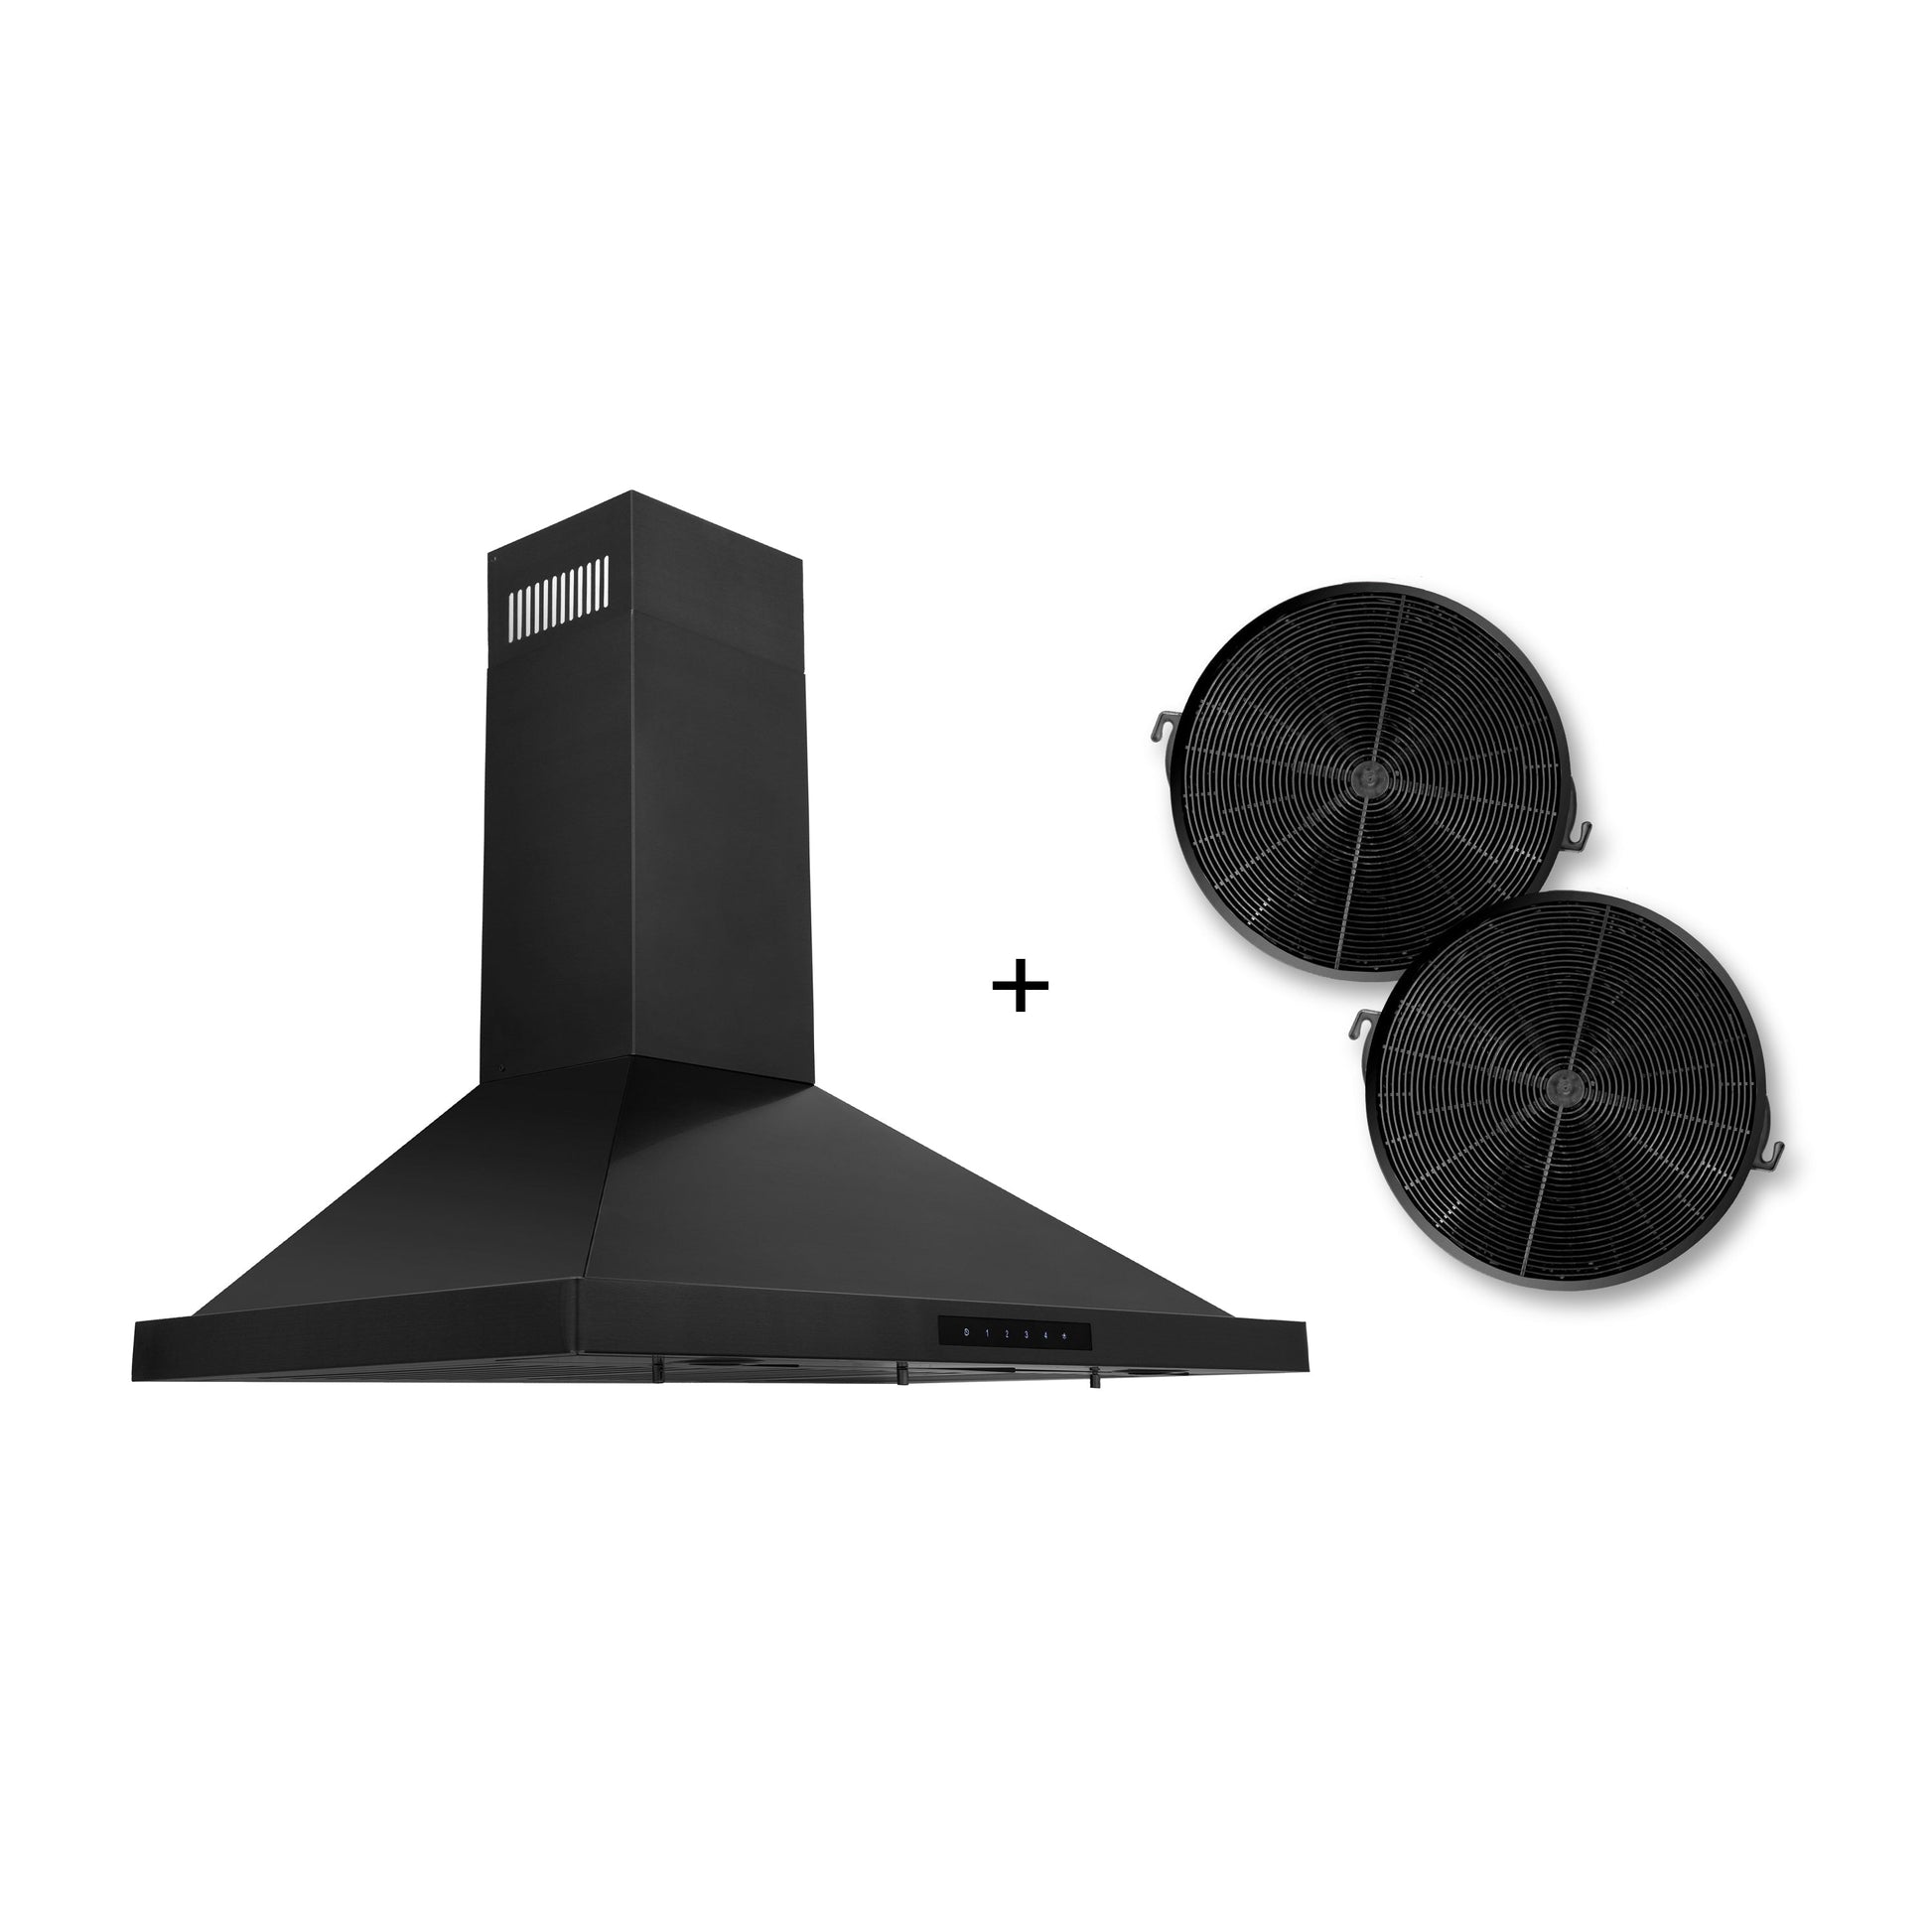 ZLINE Wall Mount Range Hood - Black Stainless Steel, Recirculating with Charcoal Filters